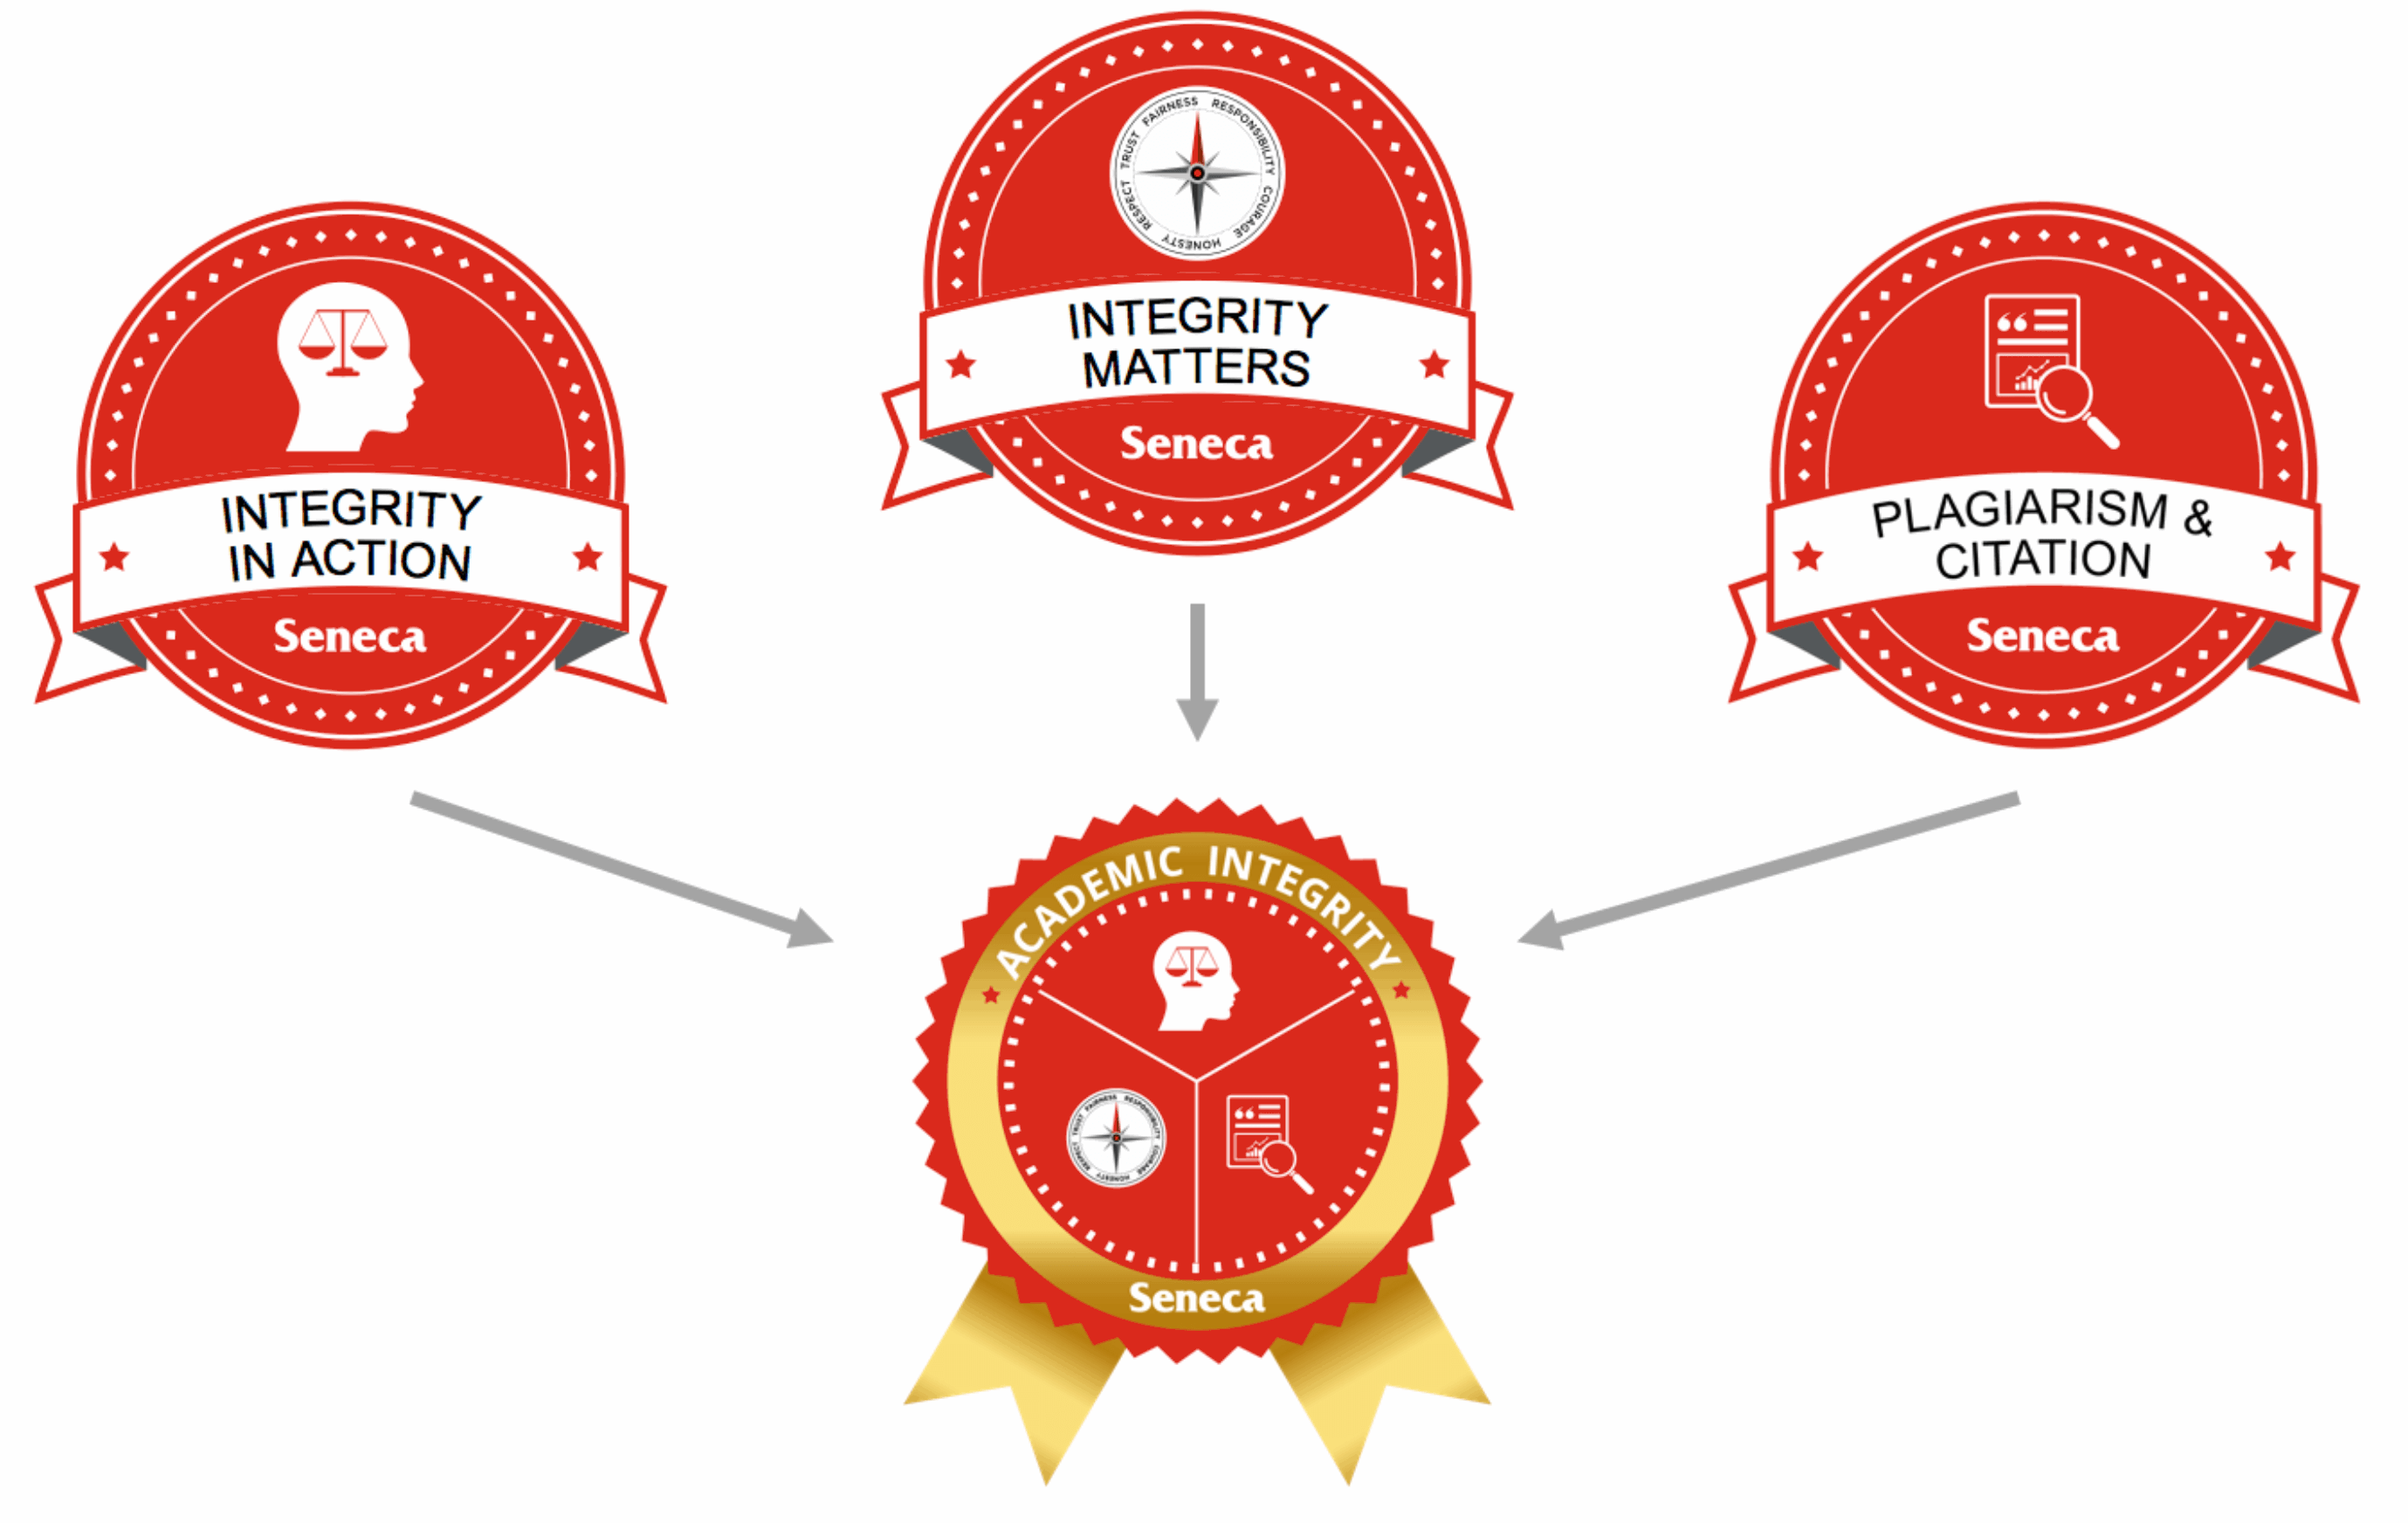 An image of the three Academic Integrity micro-credentials for students: Integrity in Action, Seneca Integrity Matters, and Plagiarism and Citations. Students who earn all three micro-credentials also earn the Academic Integrity Milestone micro-credential.